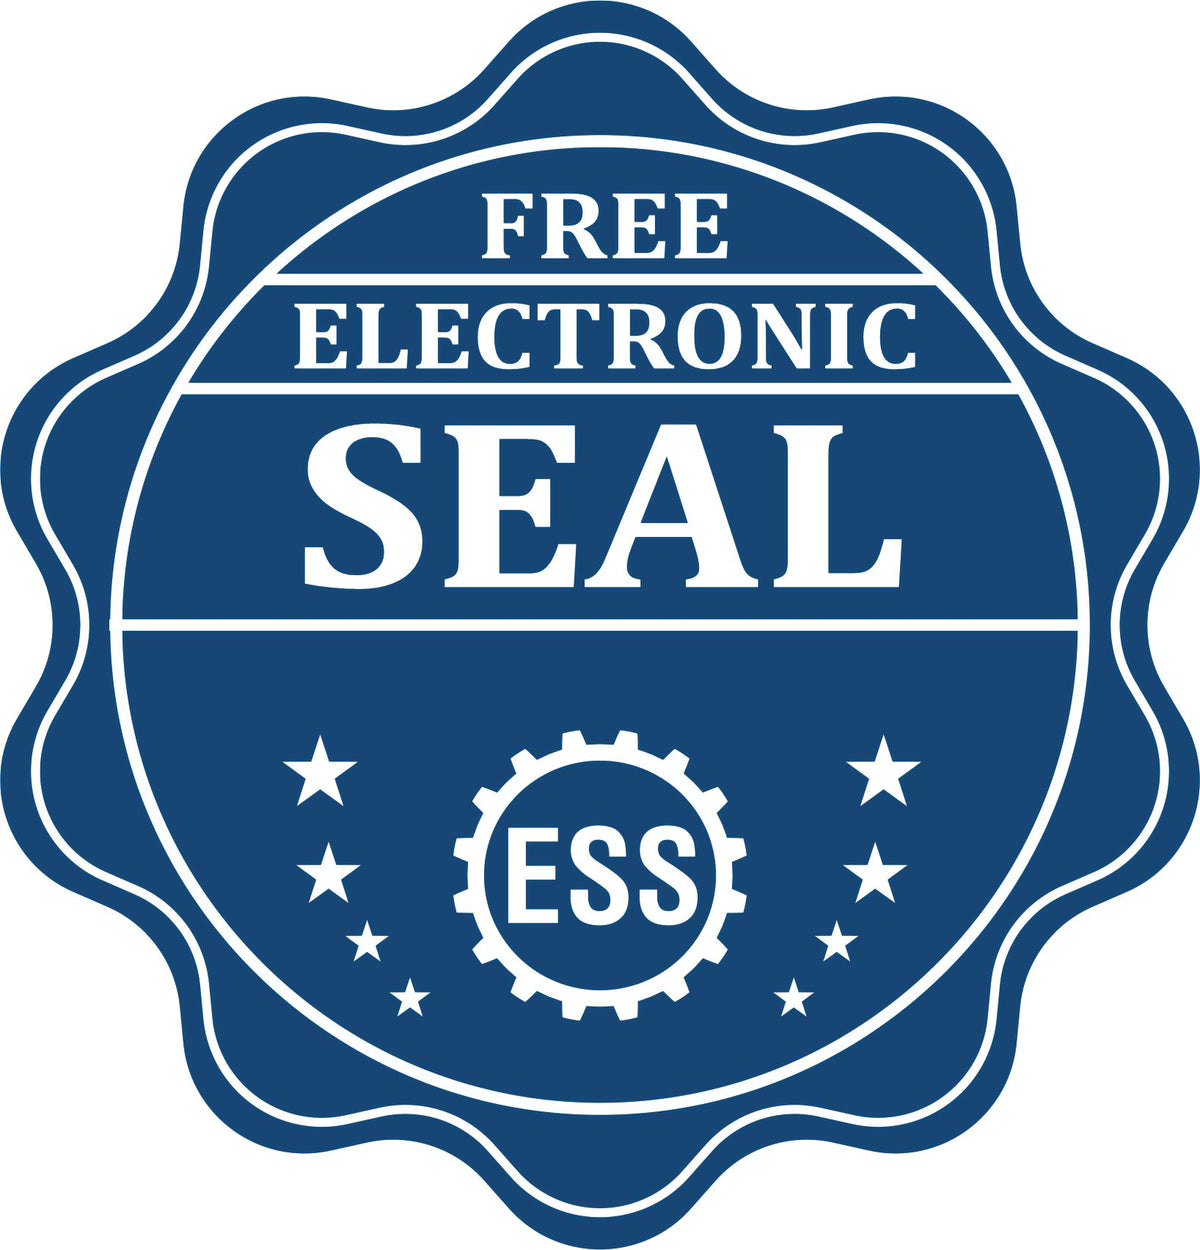 A badge showing a free electronic seal for the Illinois Geologist Desk Seal with stars and the ESS gear on the emblem.